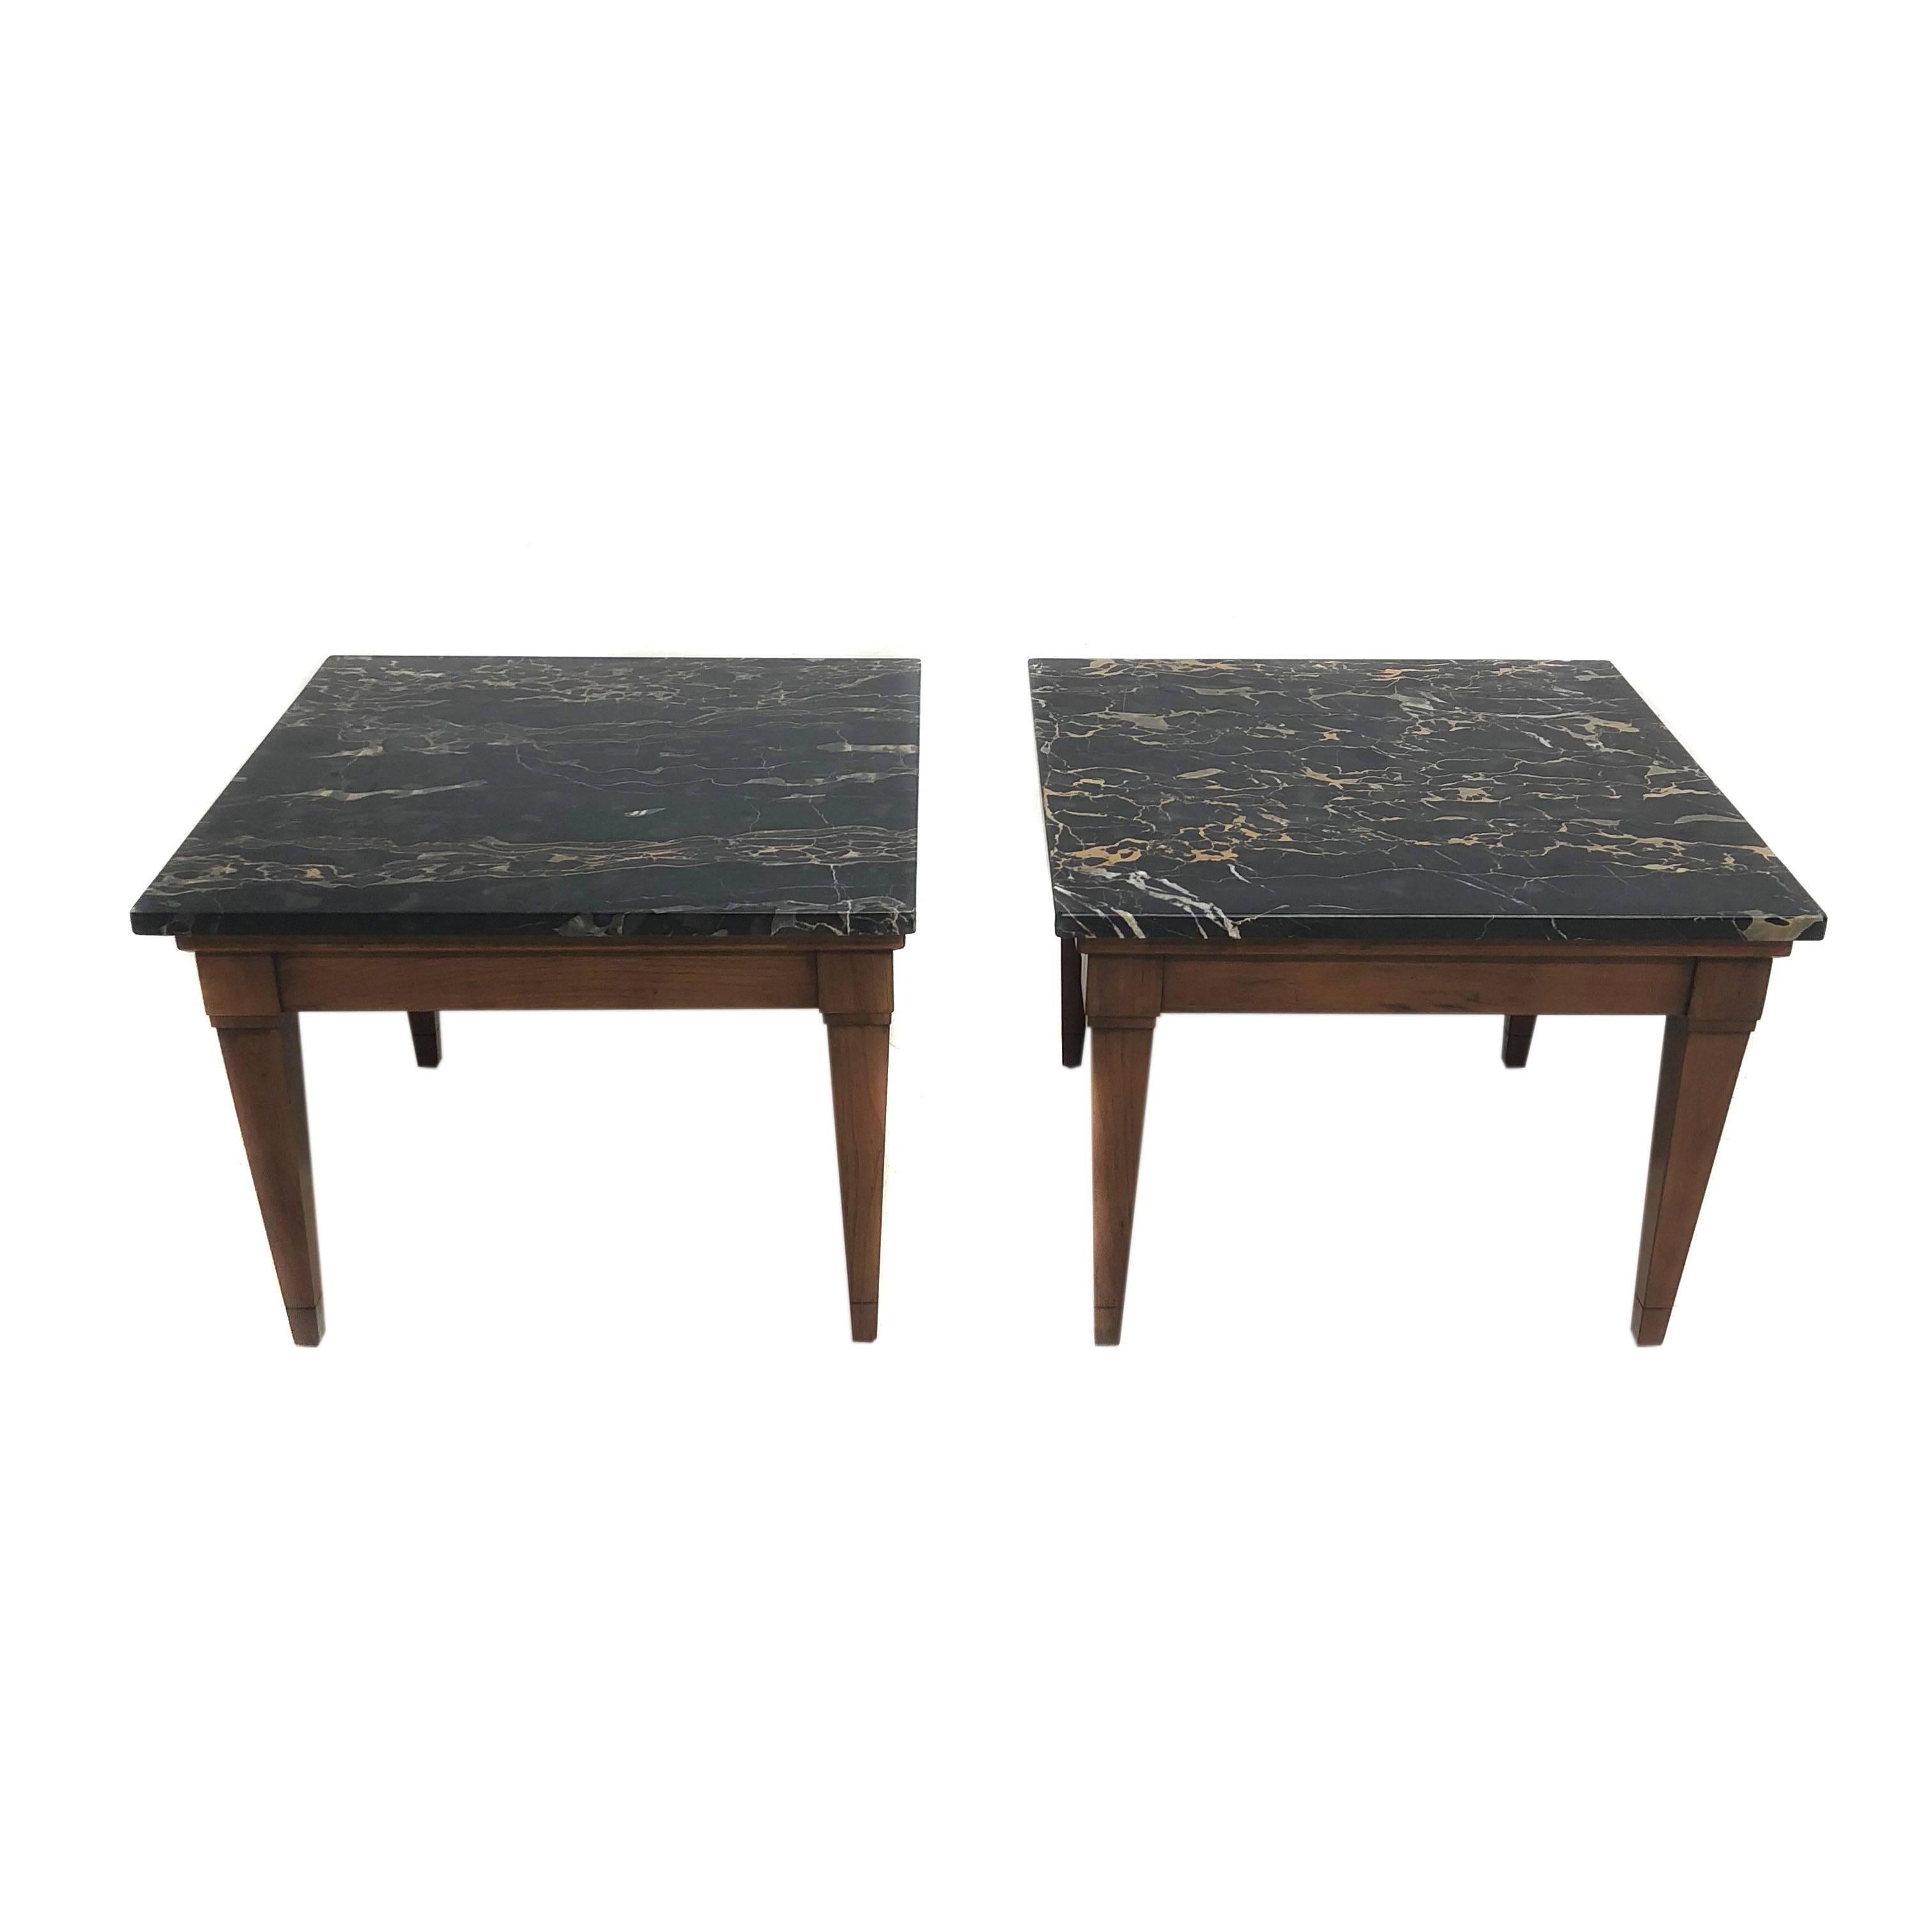 Midcentury Marble-Top Side Tables Made in Italy In Good Condition For Sale In New Hyde Park, NY